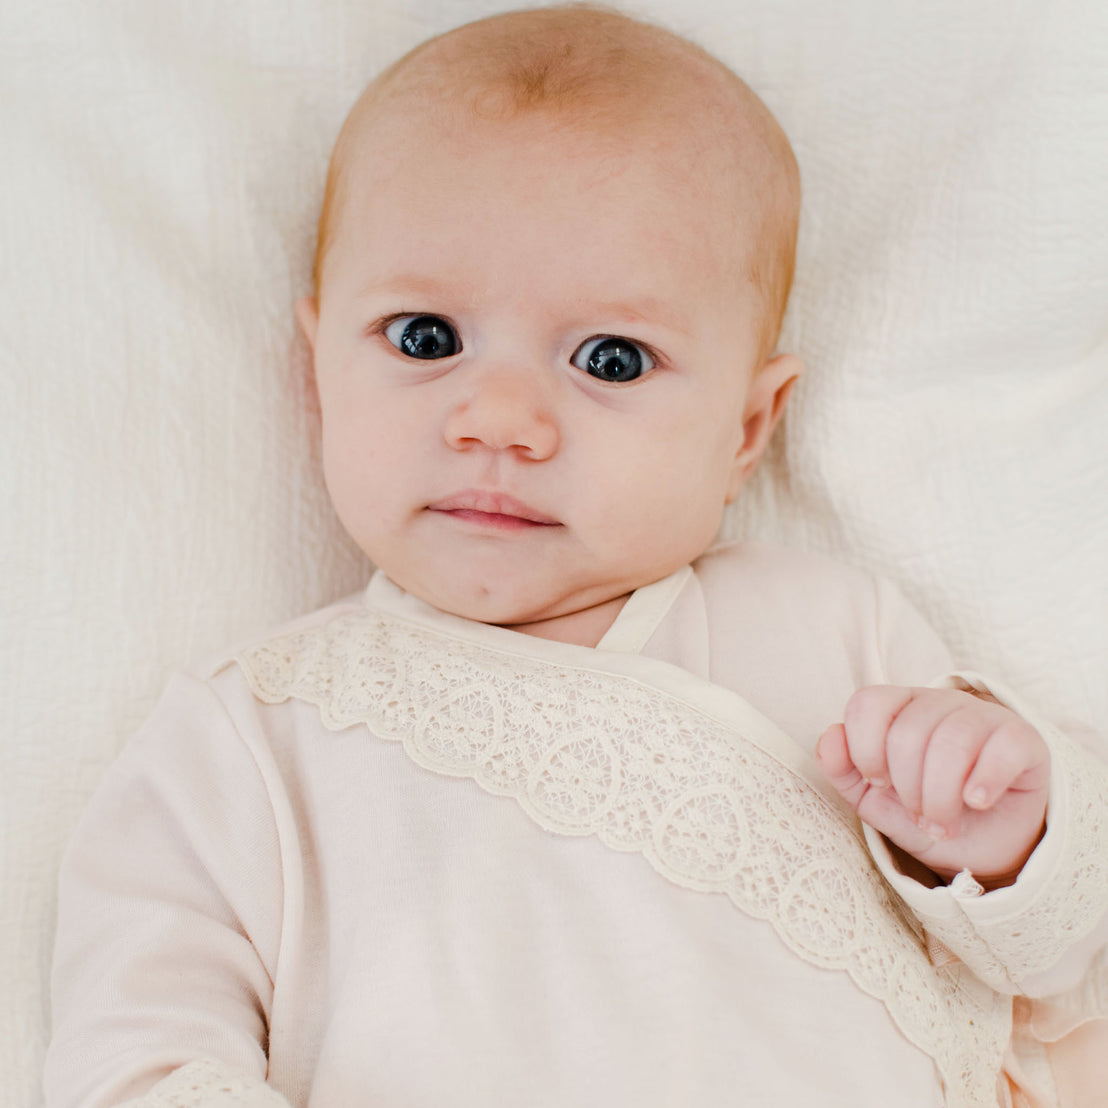 A newborn with wide blue eyes and light hair, wears the Evelyn Knot Gown with lace detailing, and lies on a soft white background.